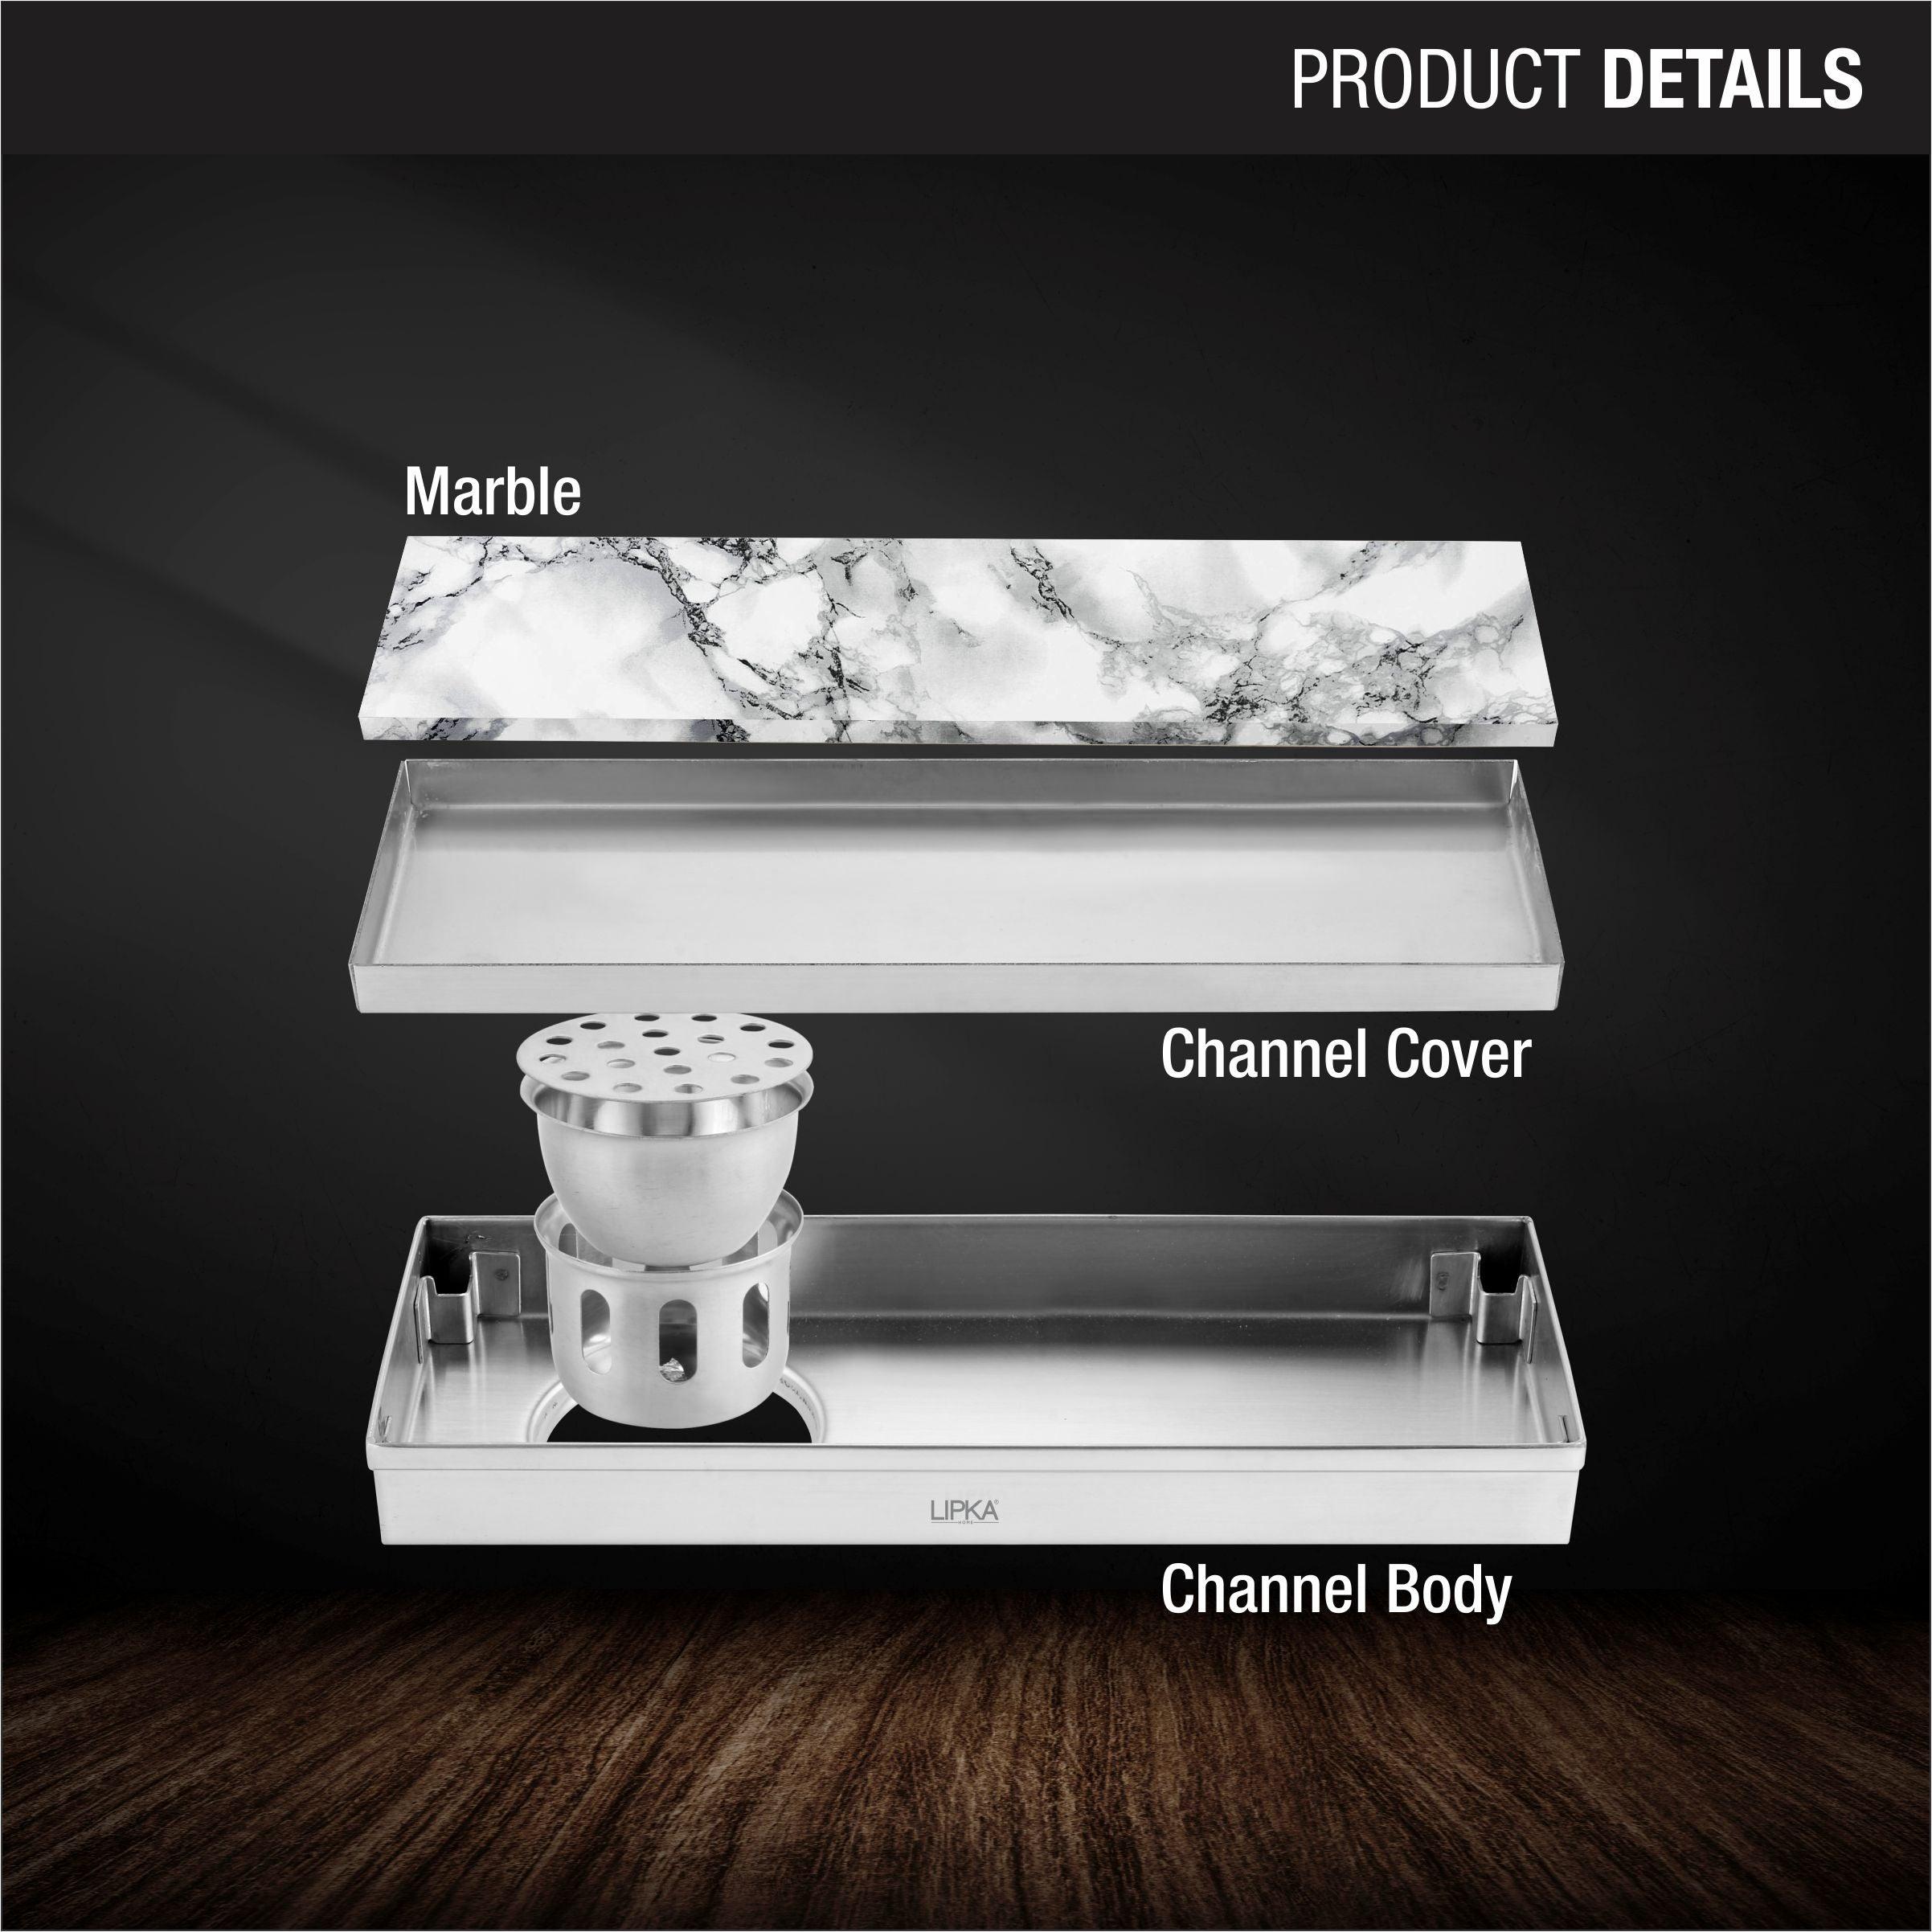 Marble Insert Shower Drain Channel (18 x 4 Inches) product details